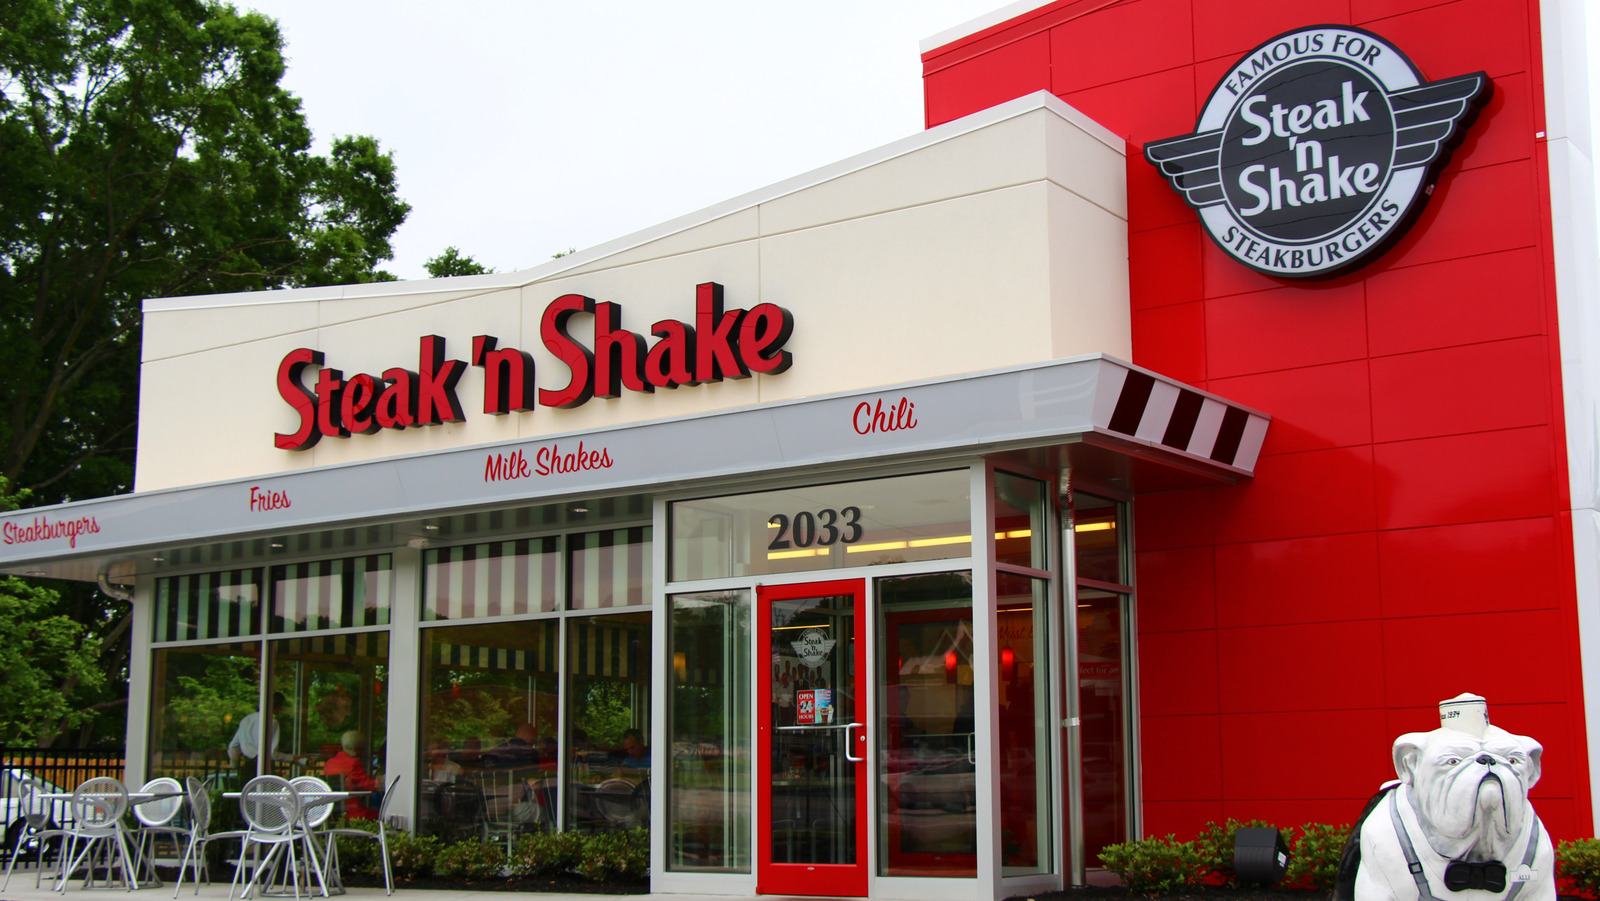 https://www.mashed.com/img/gallery/how-steak-n-shake-finally-made-a-profit-for-the-first-time-in-four-years/l-intro-1664454937.jpg